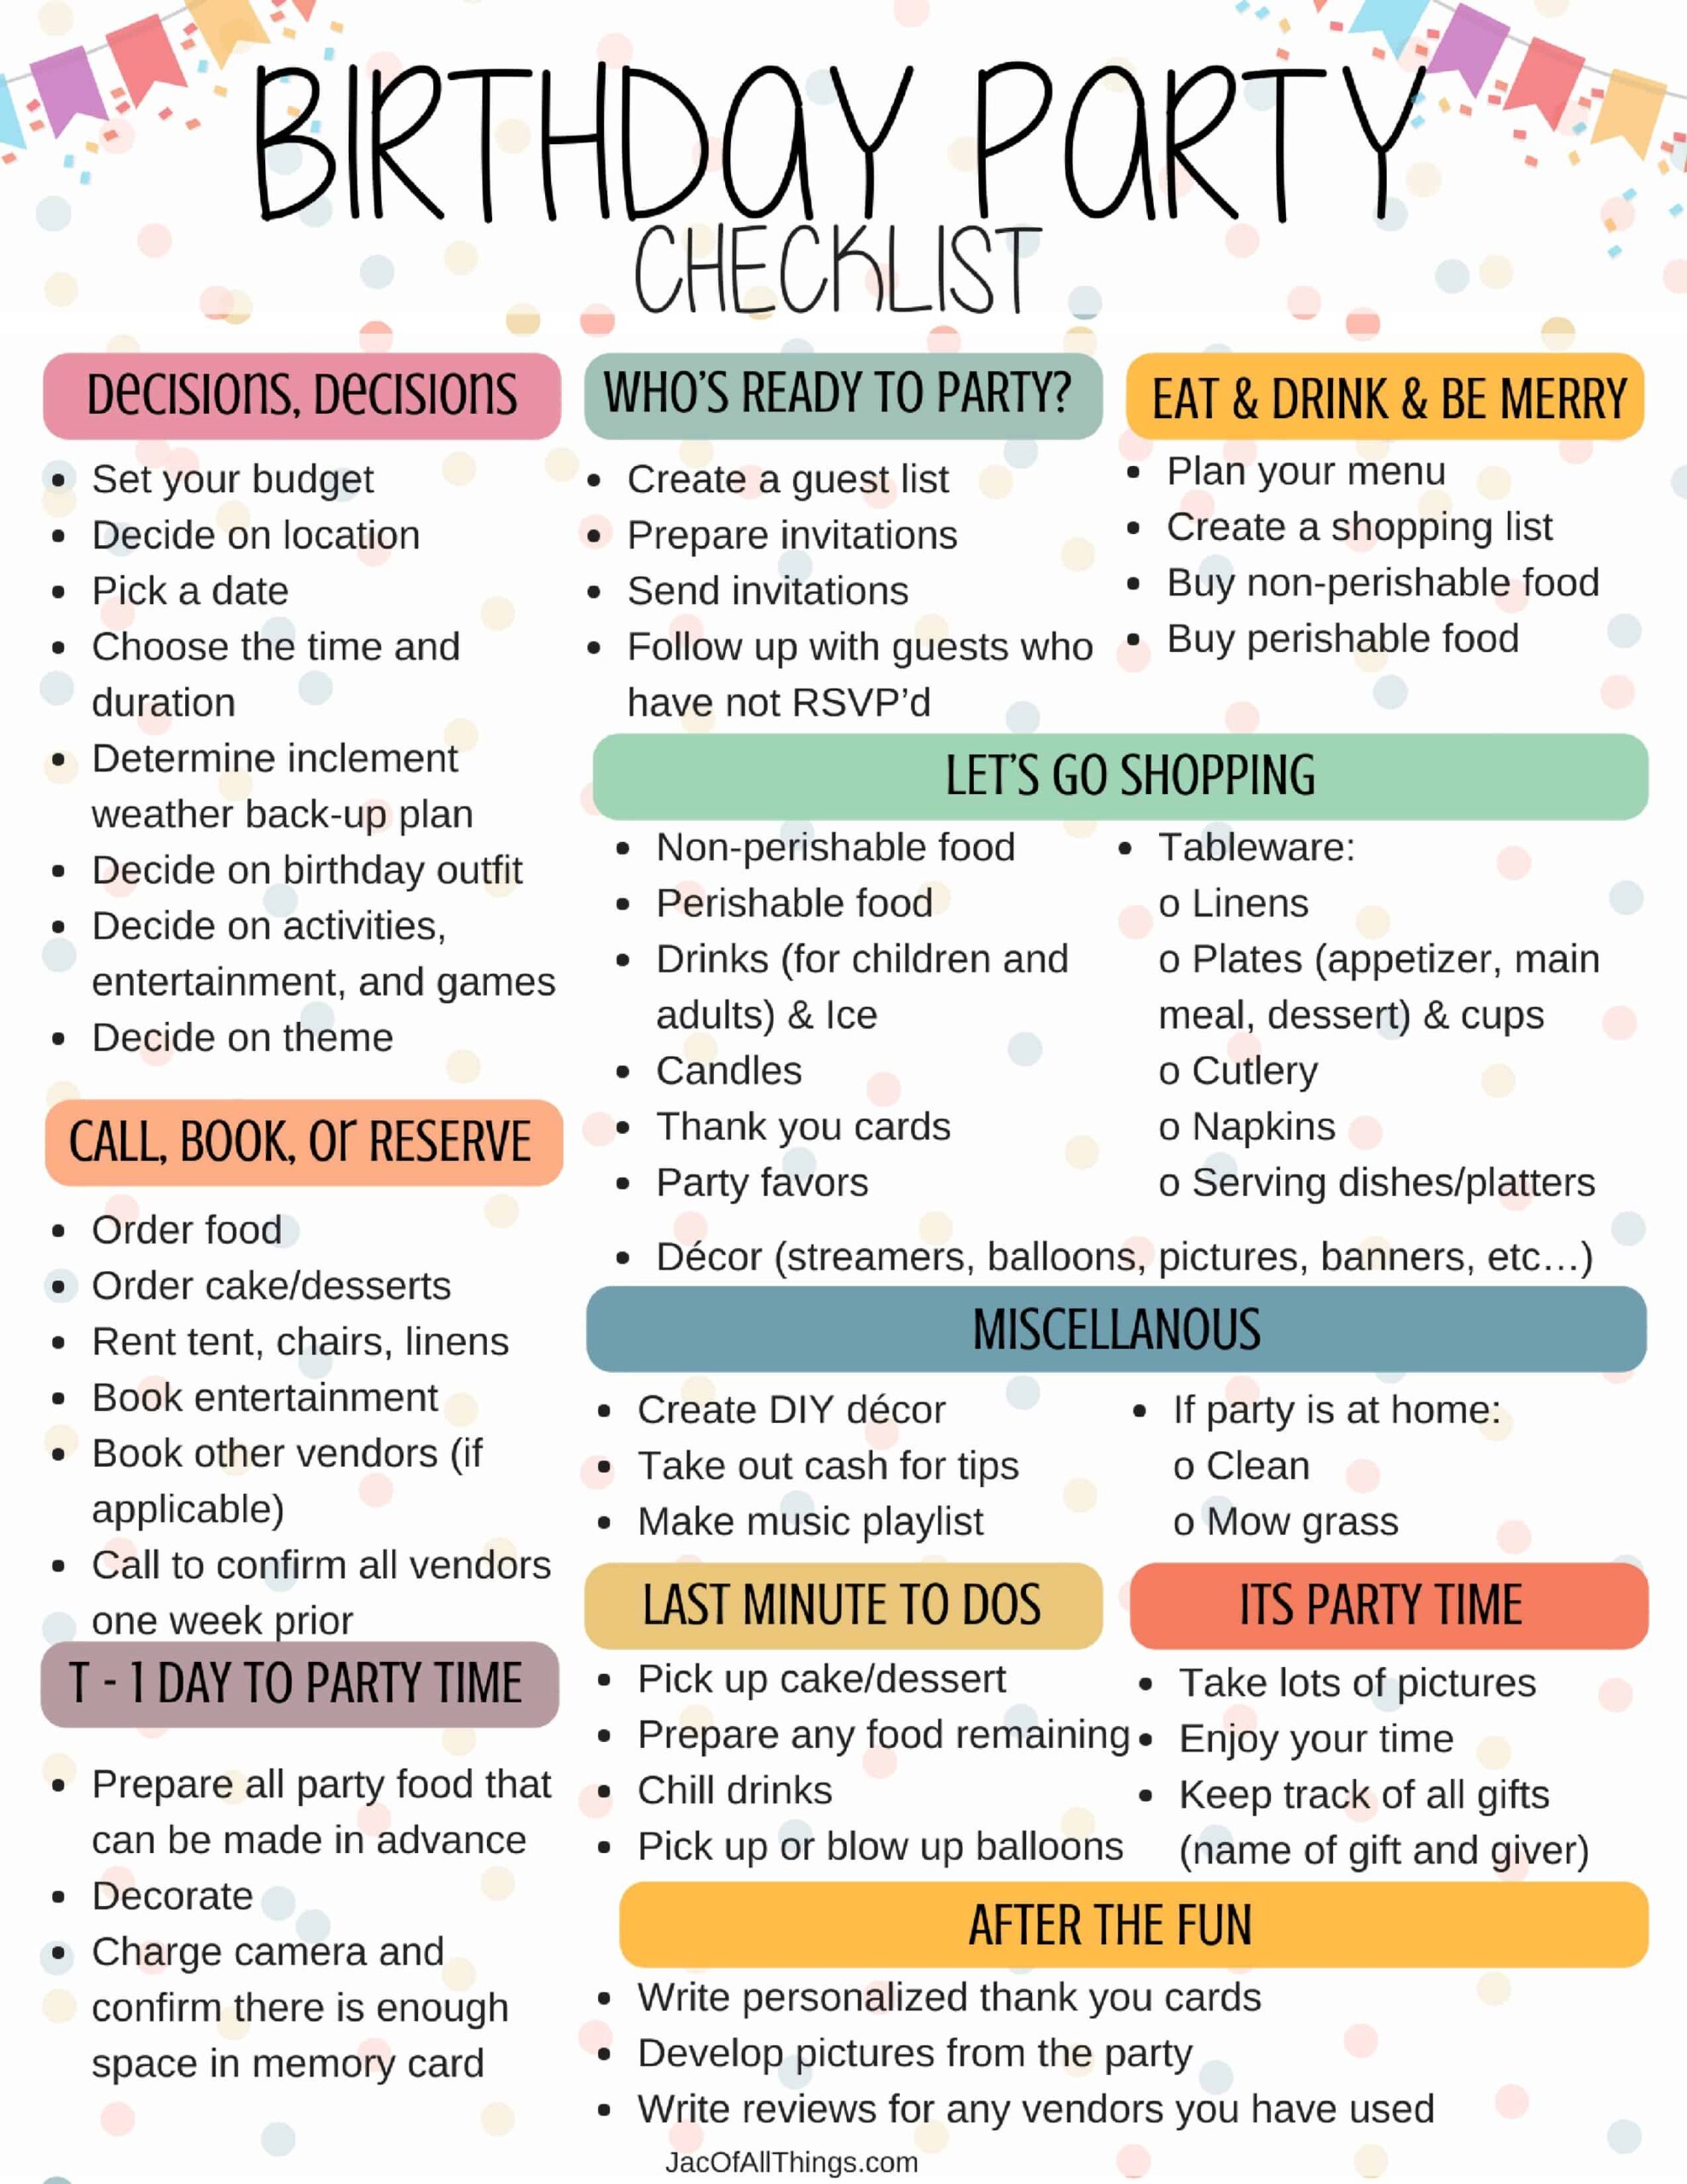 The Ultimate Birthday Party Checklist: Everything You Need To Plan A Fun Celebration